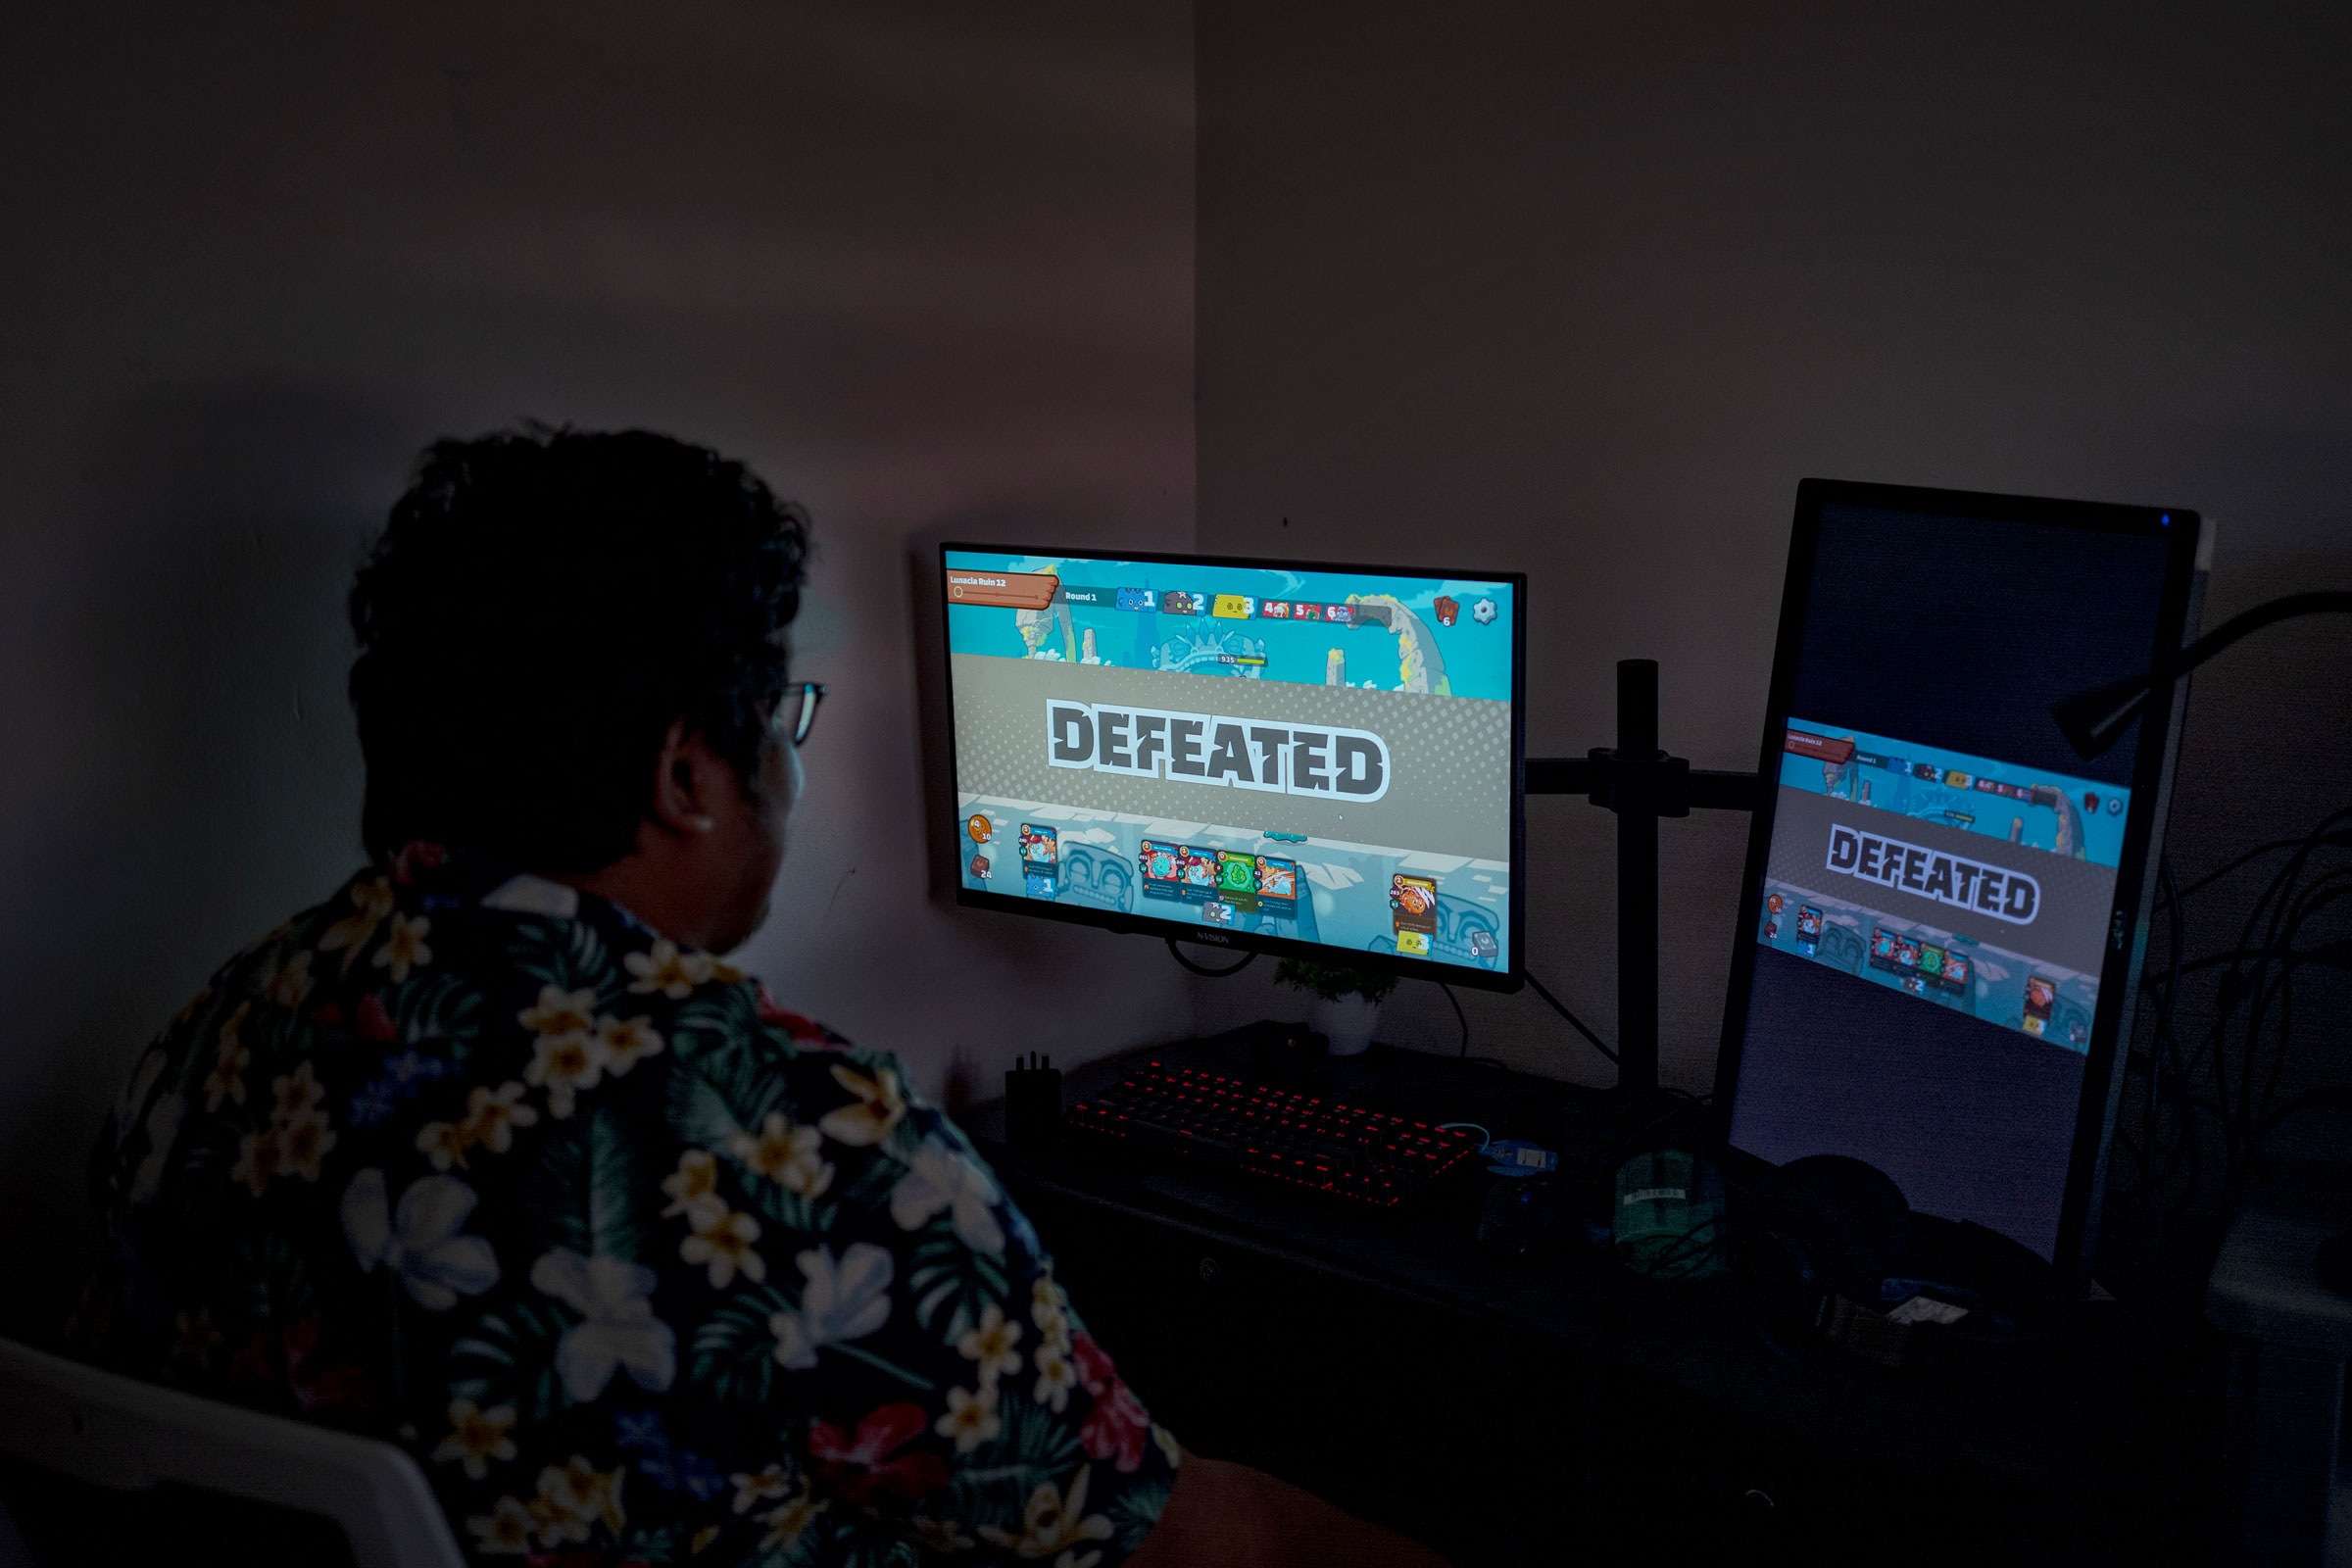 Albert Oasnon, an Axie "manager", plays the game at his home in Imus, Cavite, in the outskirts of Manila, Philippines, on July 19, 2022. Oasnon, who works in content marketing and also runs a small media company, says that during the game's peak last year, he was managing around 20 scholars. (Ezra Acayan for TIME)